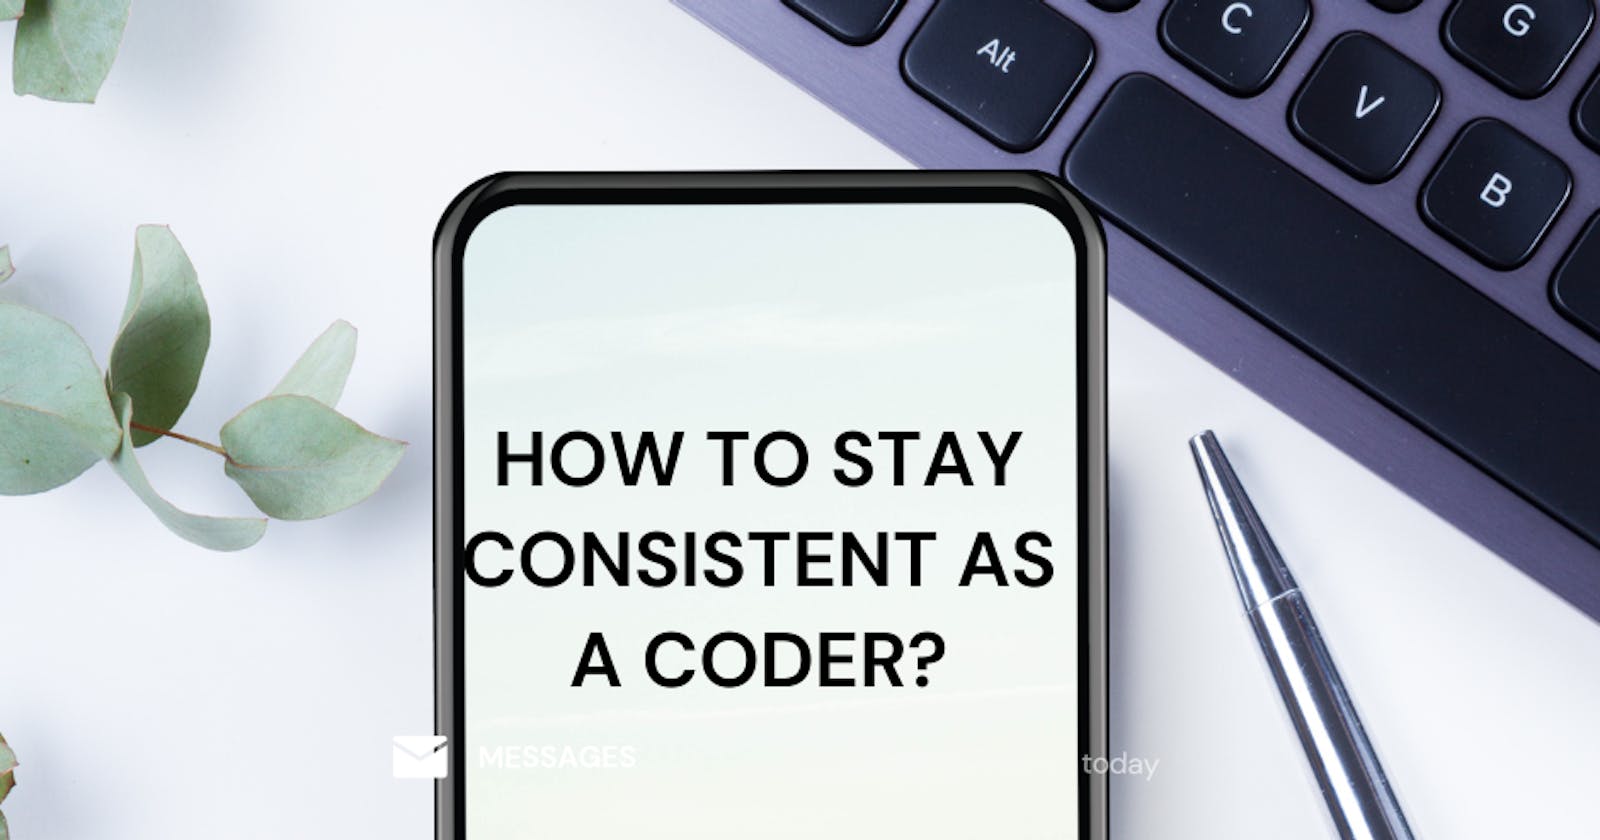 How to stay consistent as a coder?